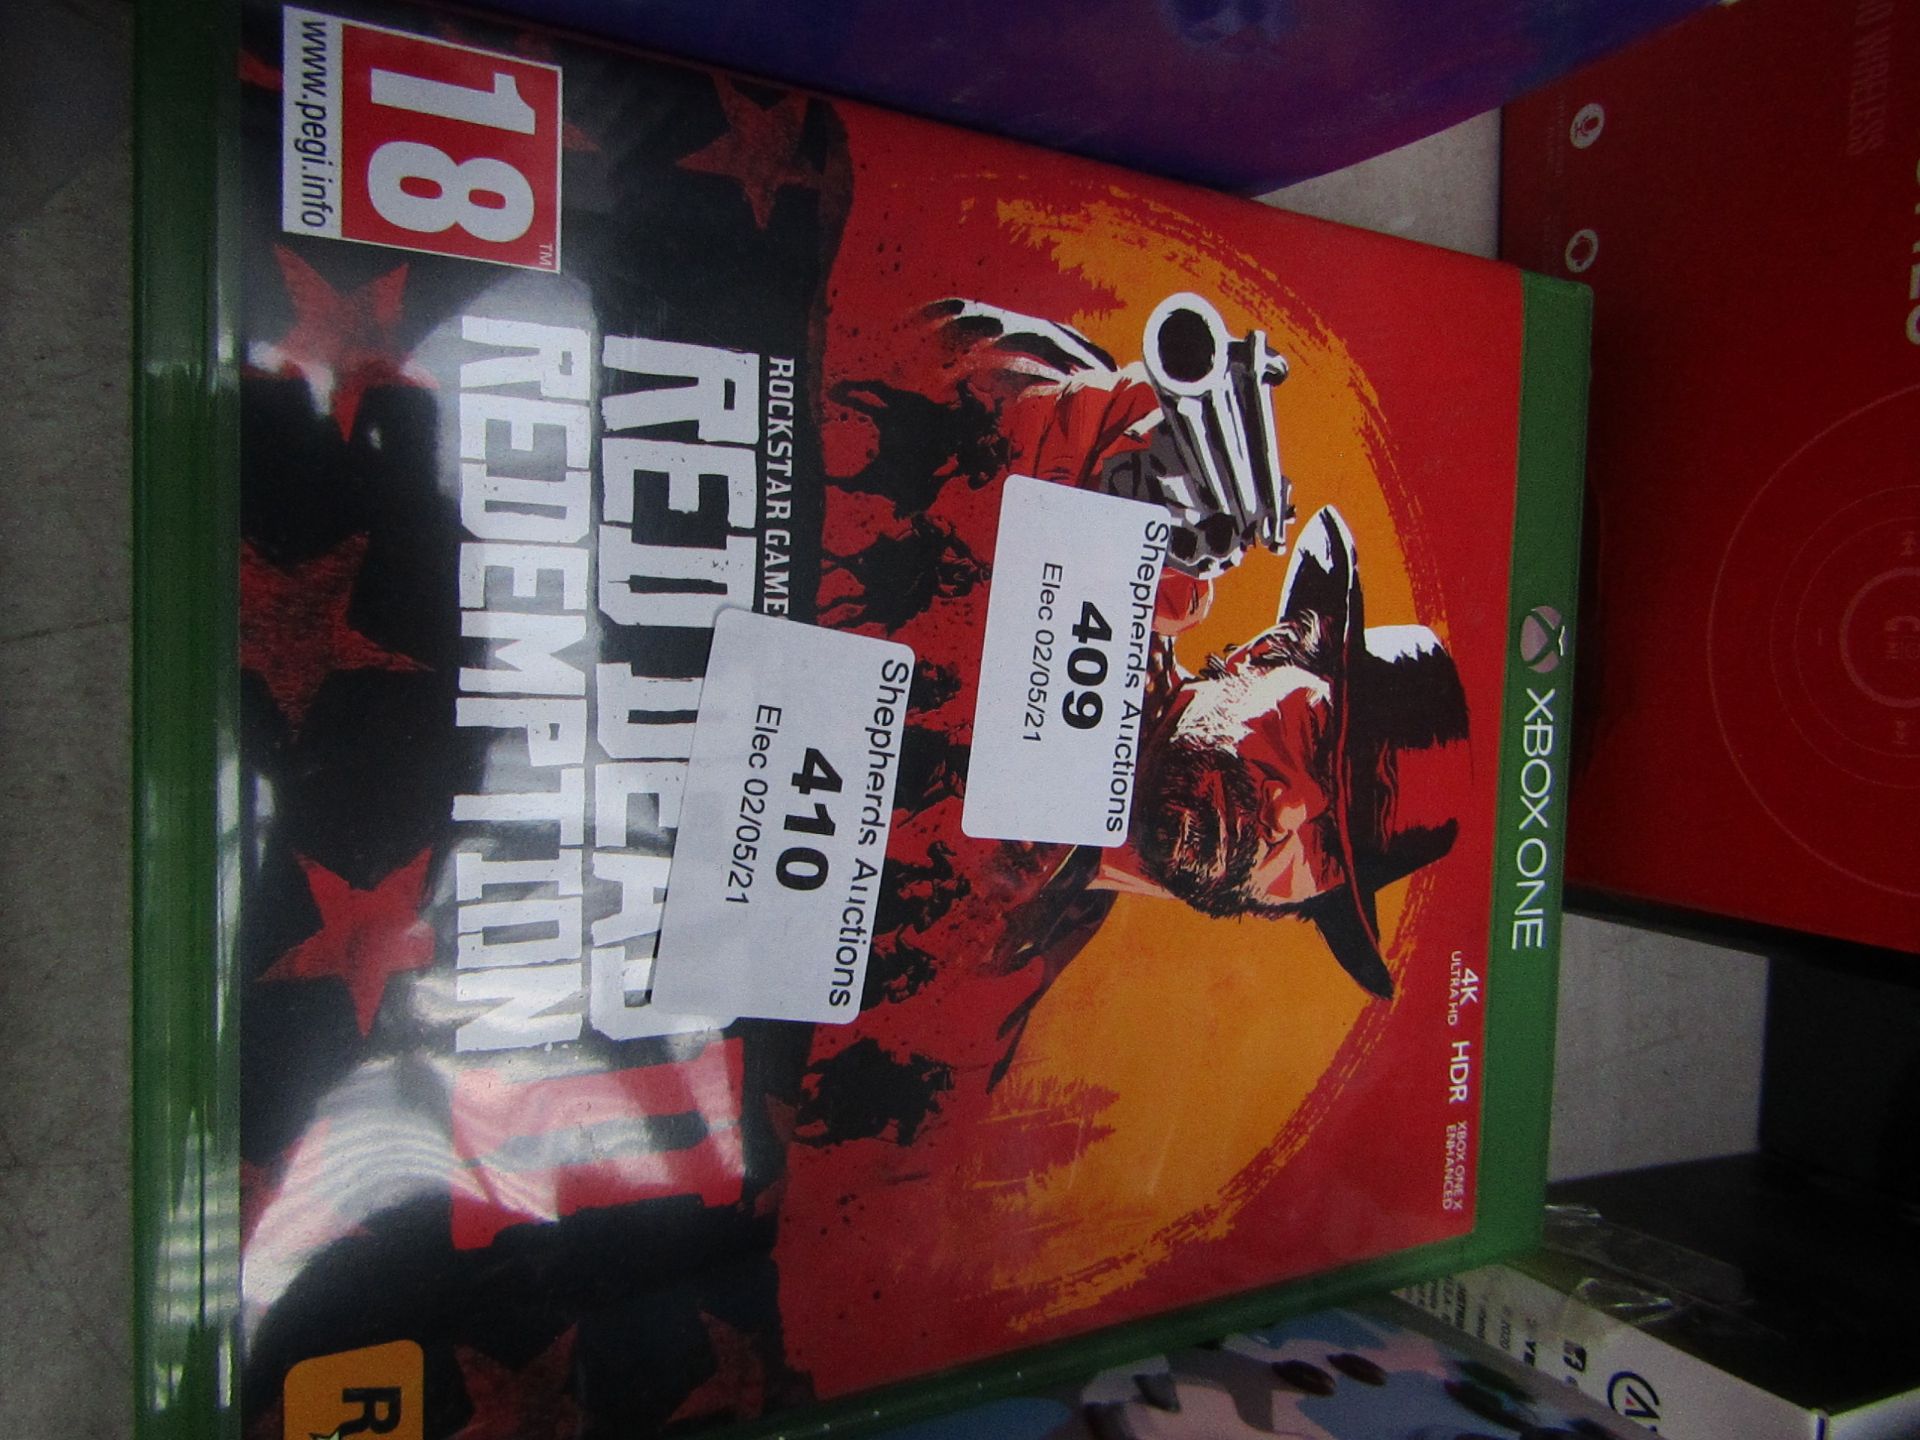 Red Dead Redemption 2 Xbox One, RATED 18+ | RRP CIRCA £20.99 | Unchecked